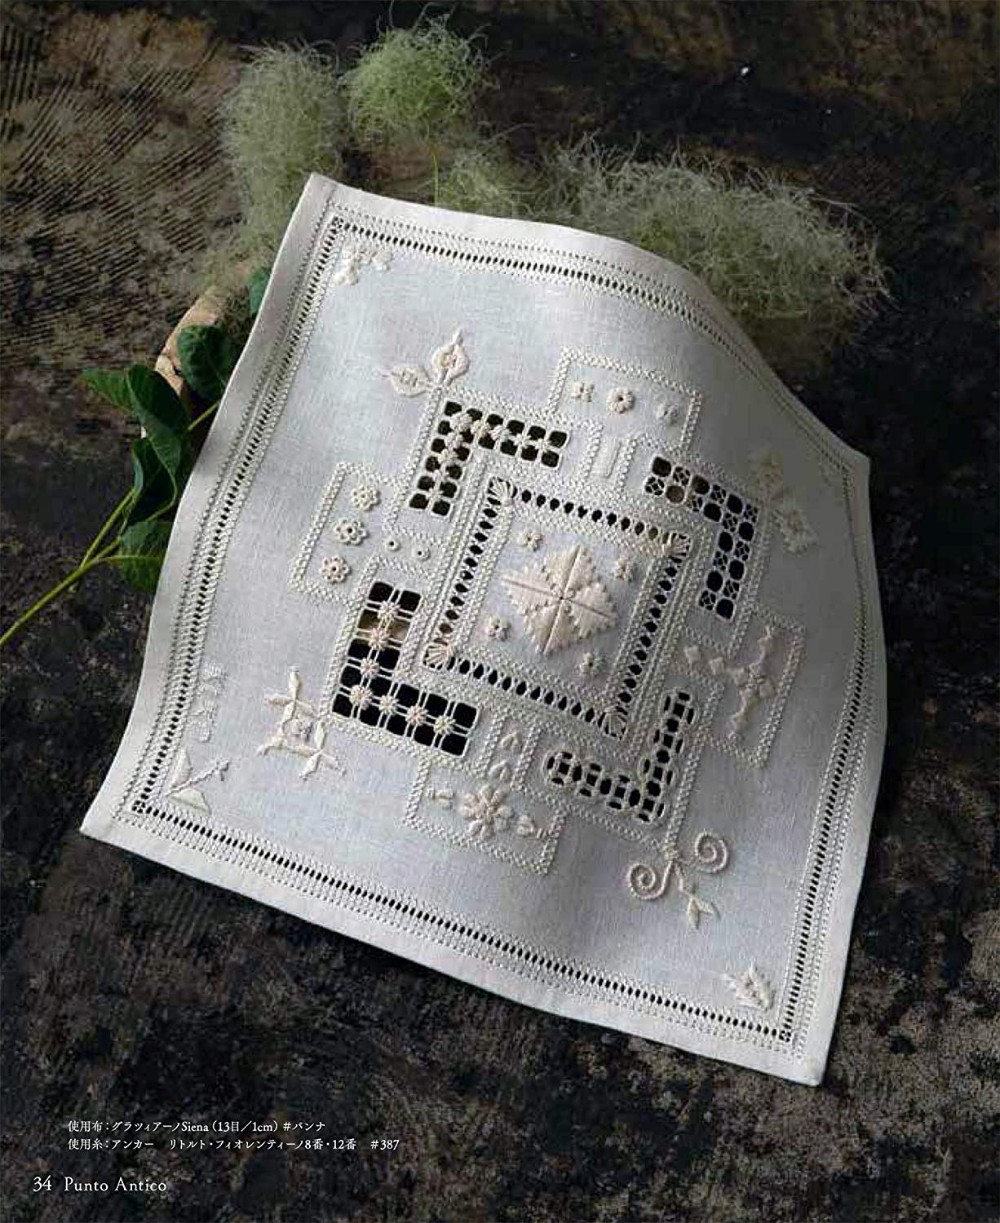 Italian traditional embroidery Punt Antico